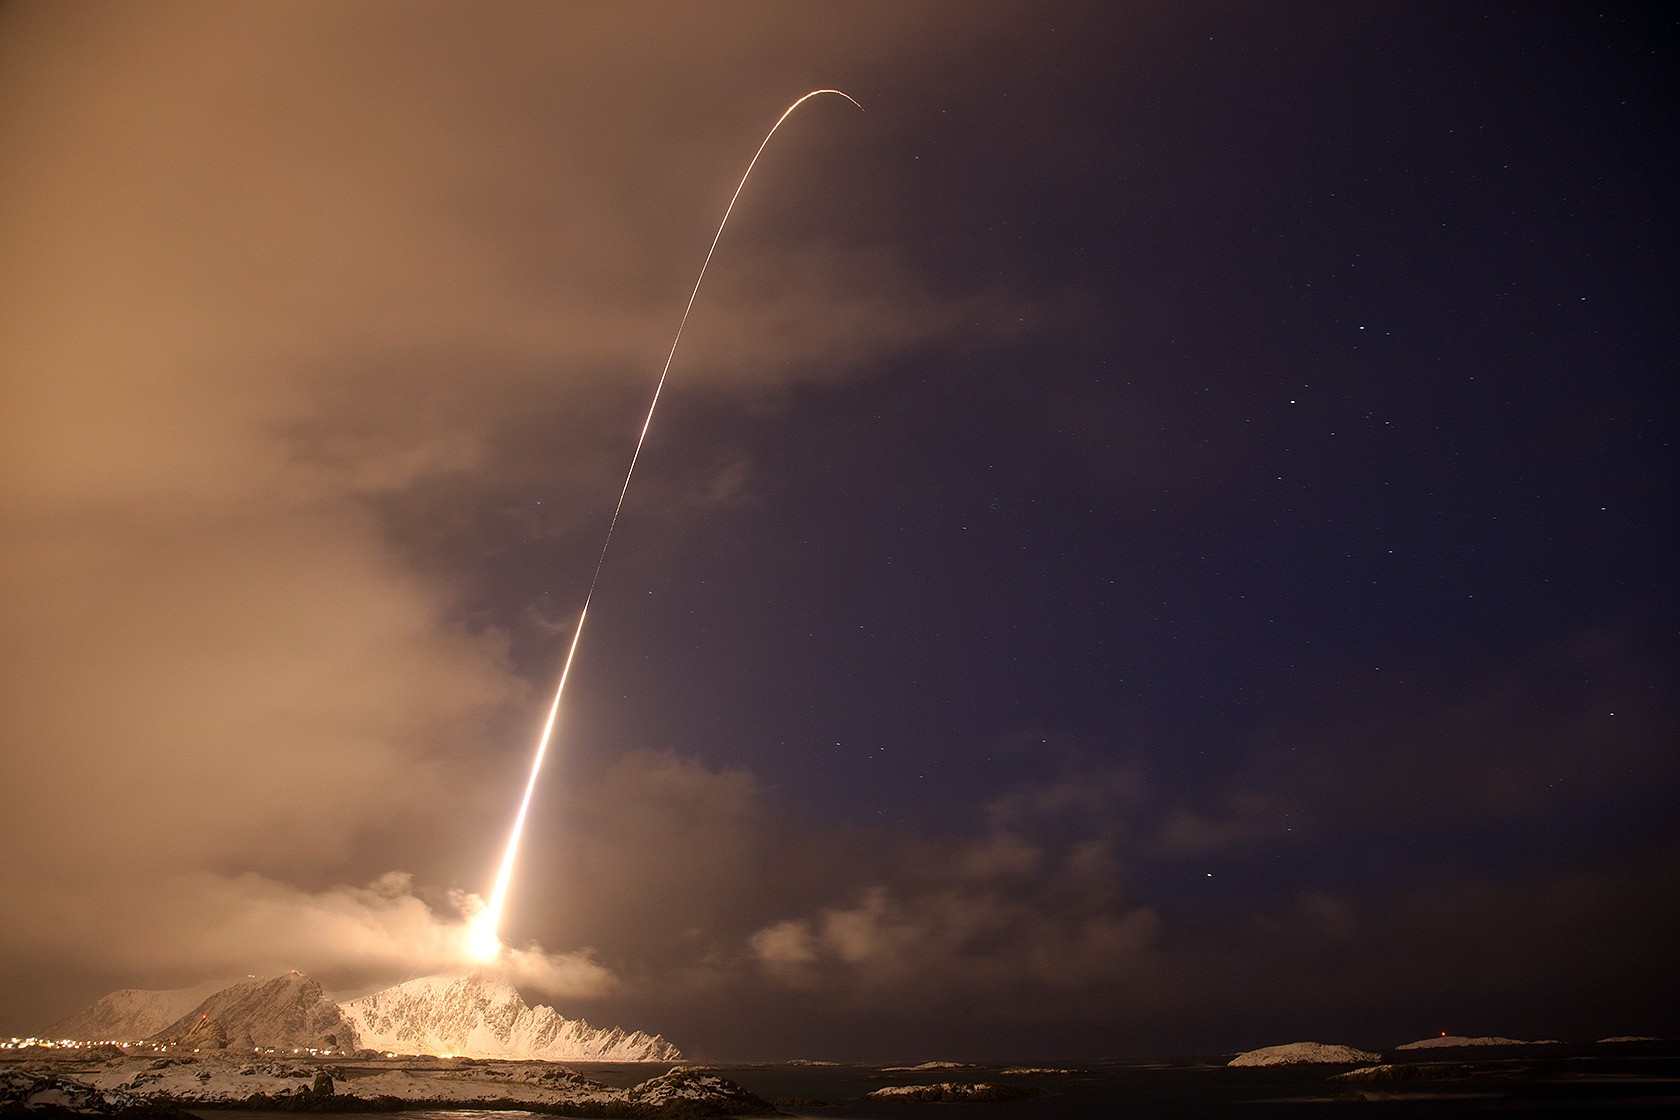 photography, Long exposure, Rockets, SpaceX, Sky Wallpaper